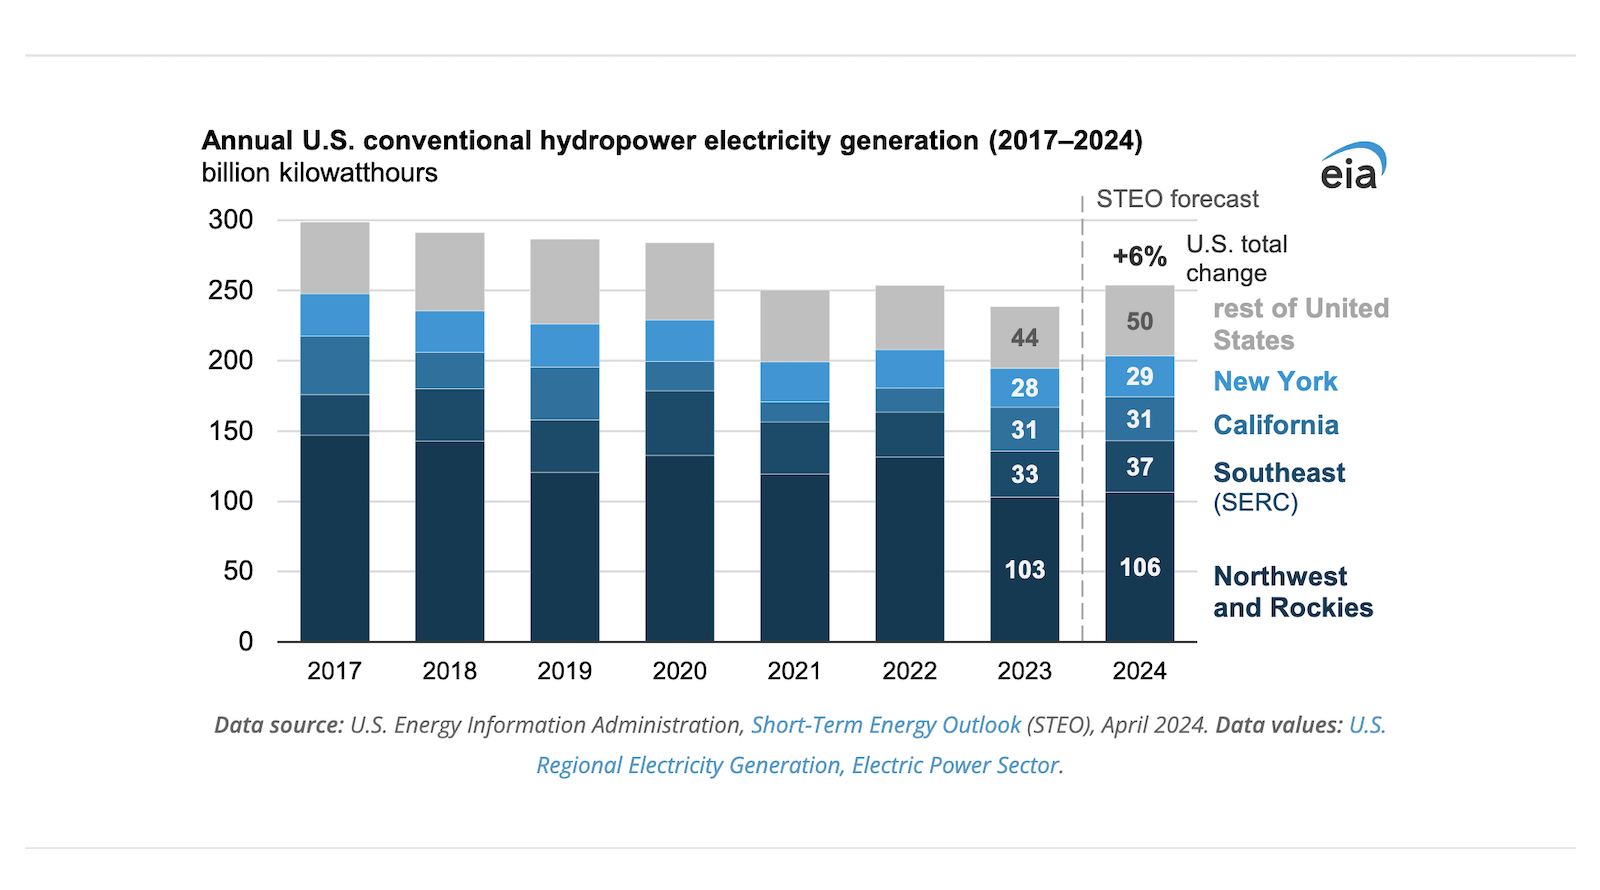 U.S. Hydropower Generation Expected to Increase by 6% in 2024 Following Last Year’s Lows